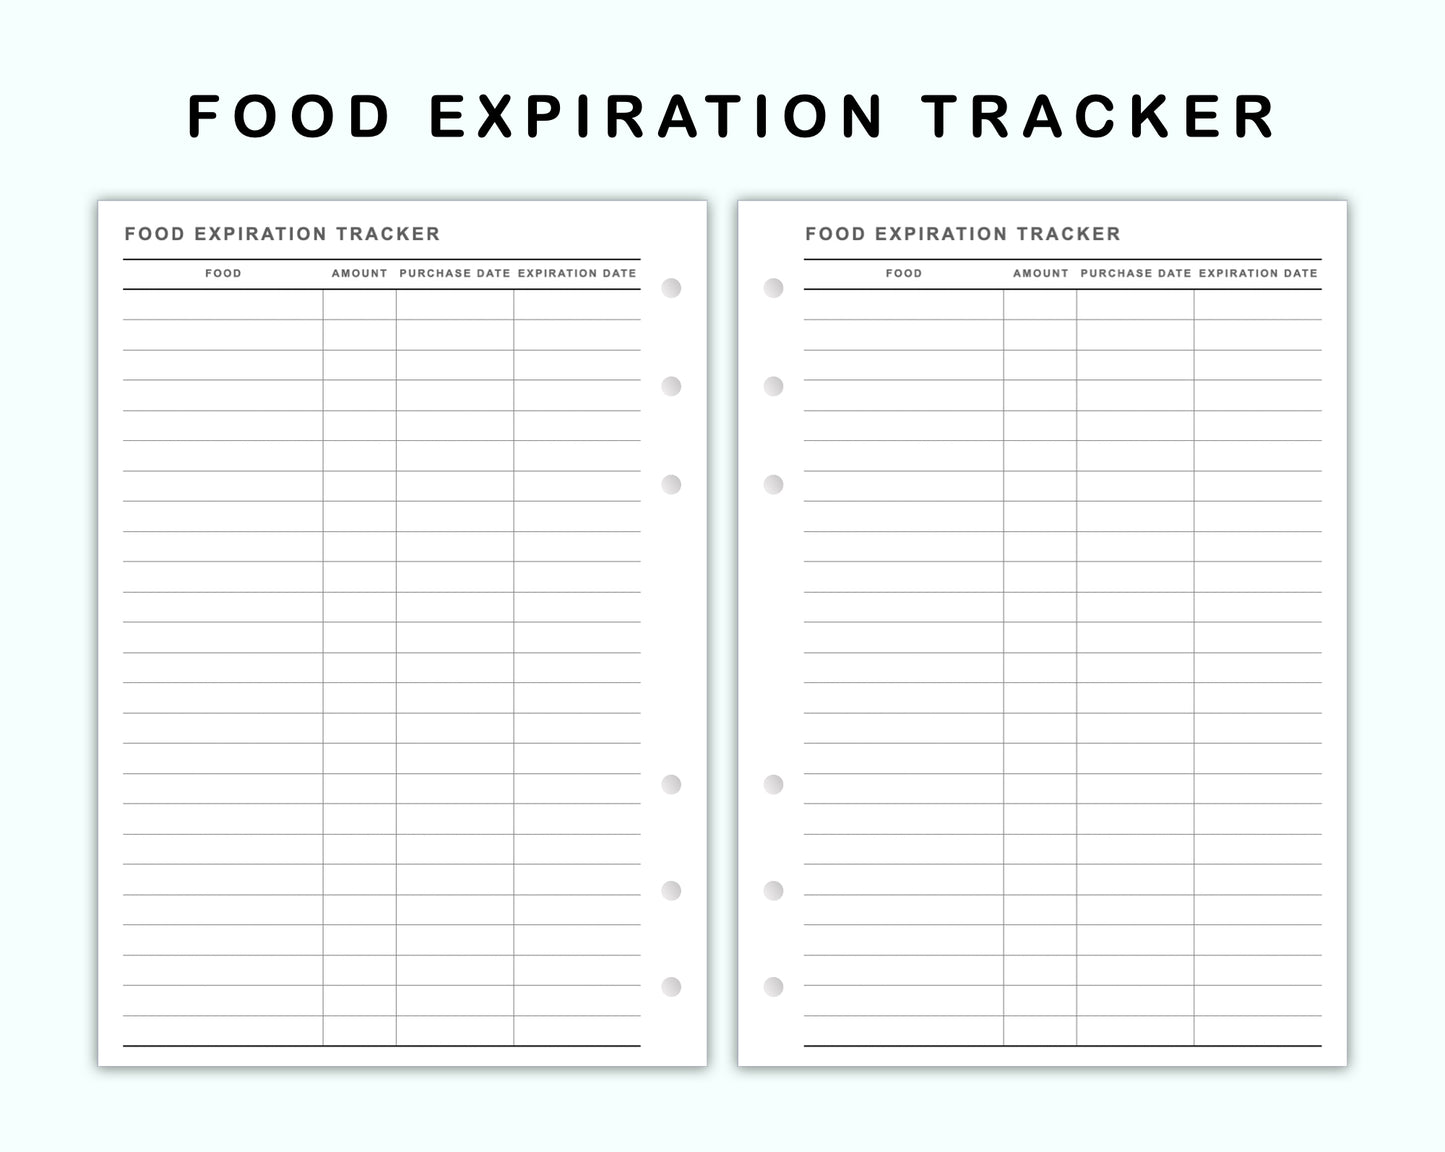 Personal Wide Inserts - Food Expiration Tracker